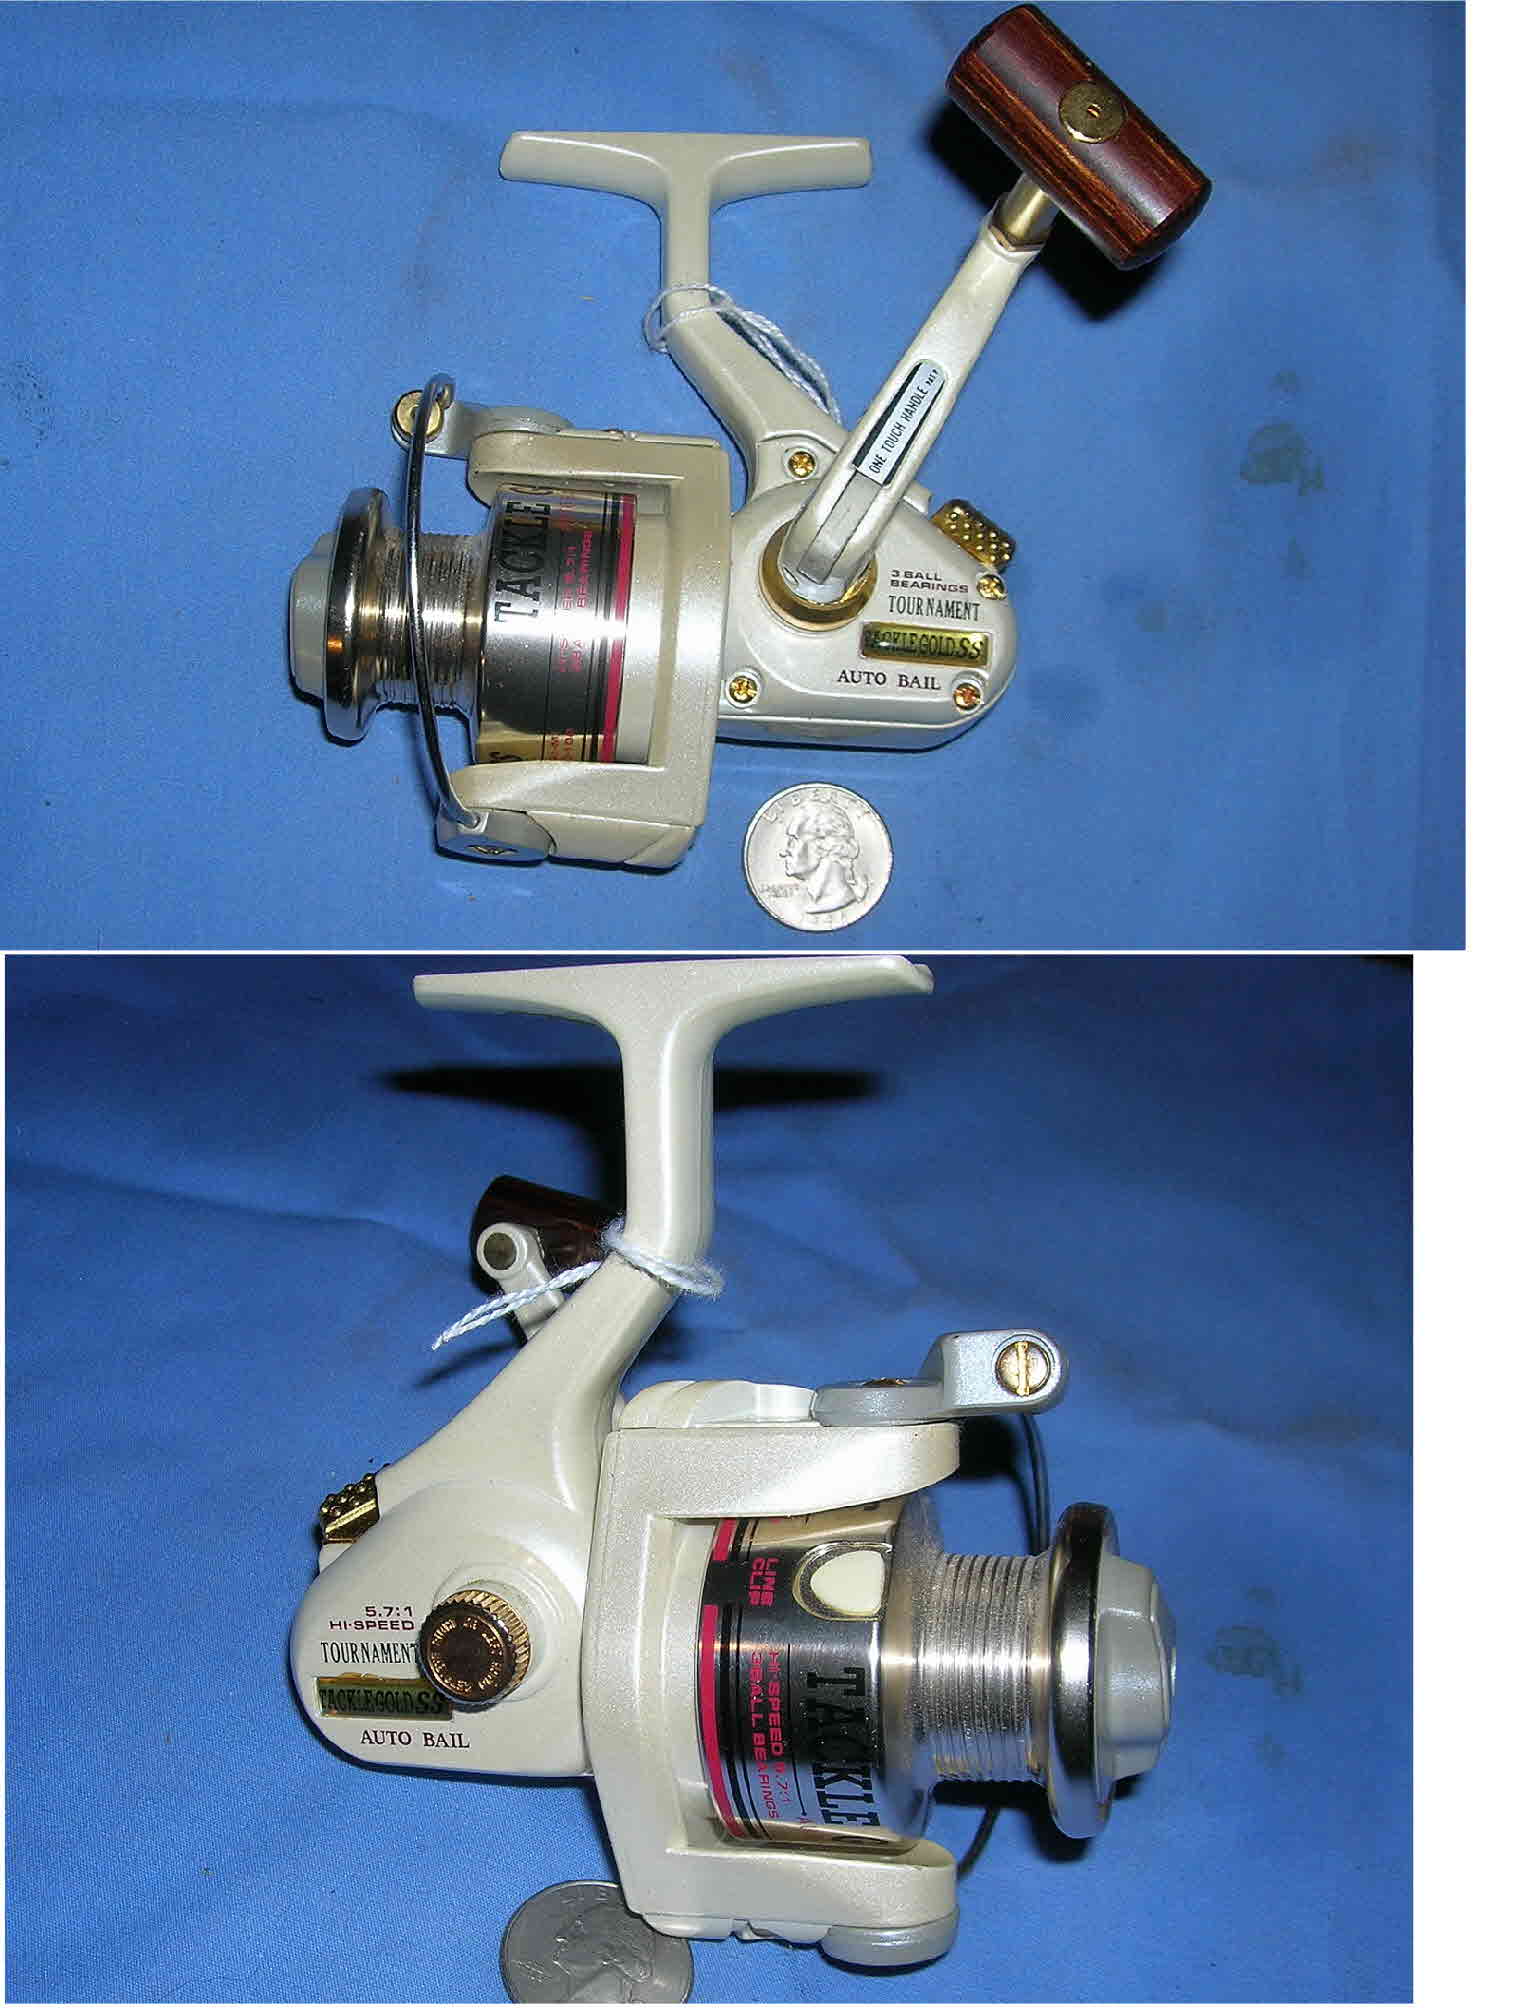 VINTAGE omni XL300 Spin Cast Fishing Reel made in Korea - sporting